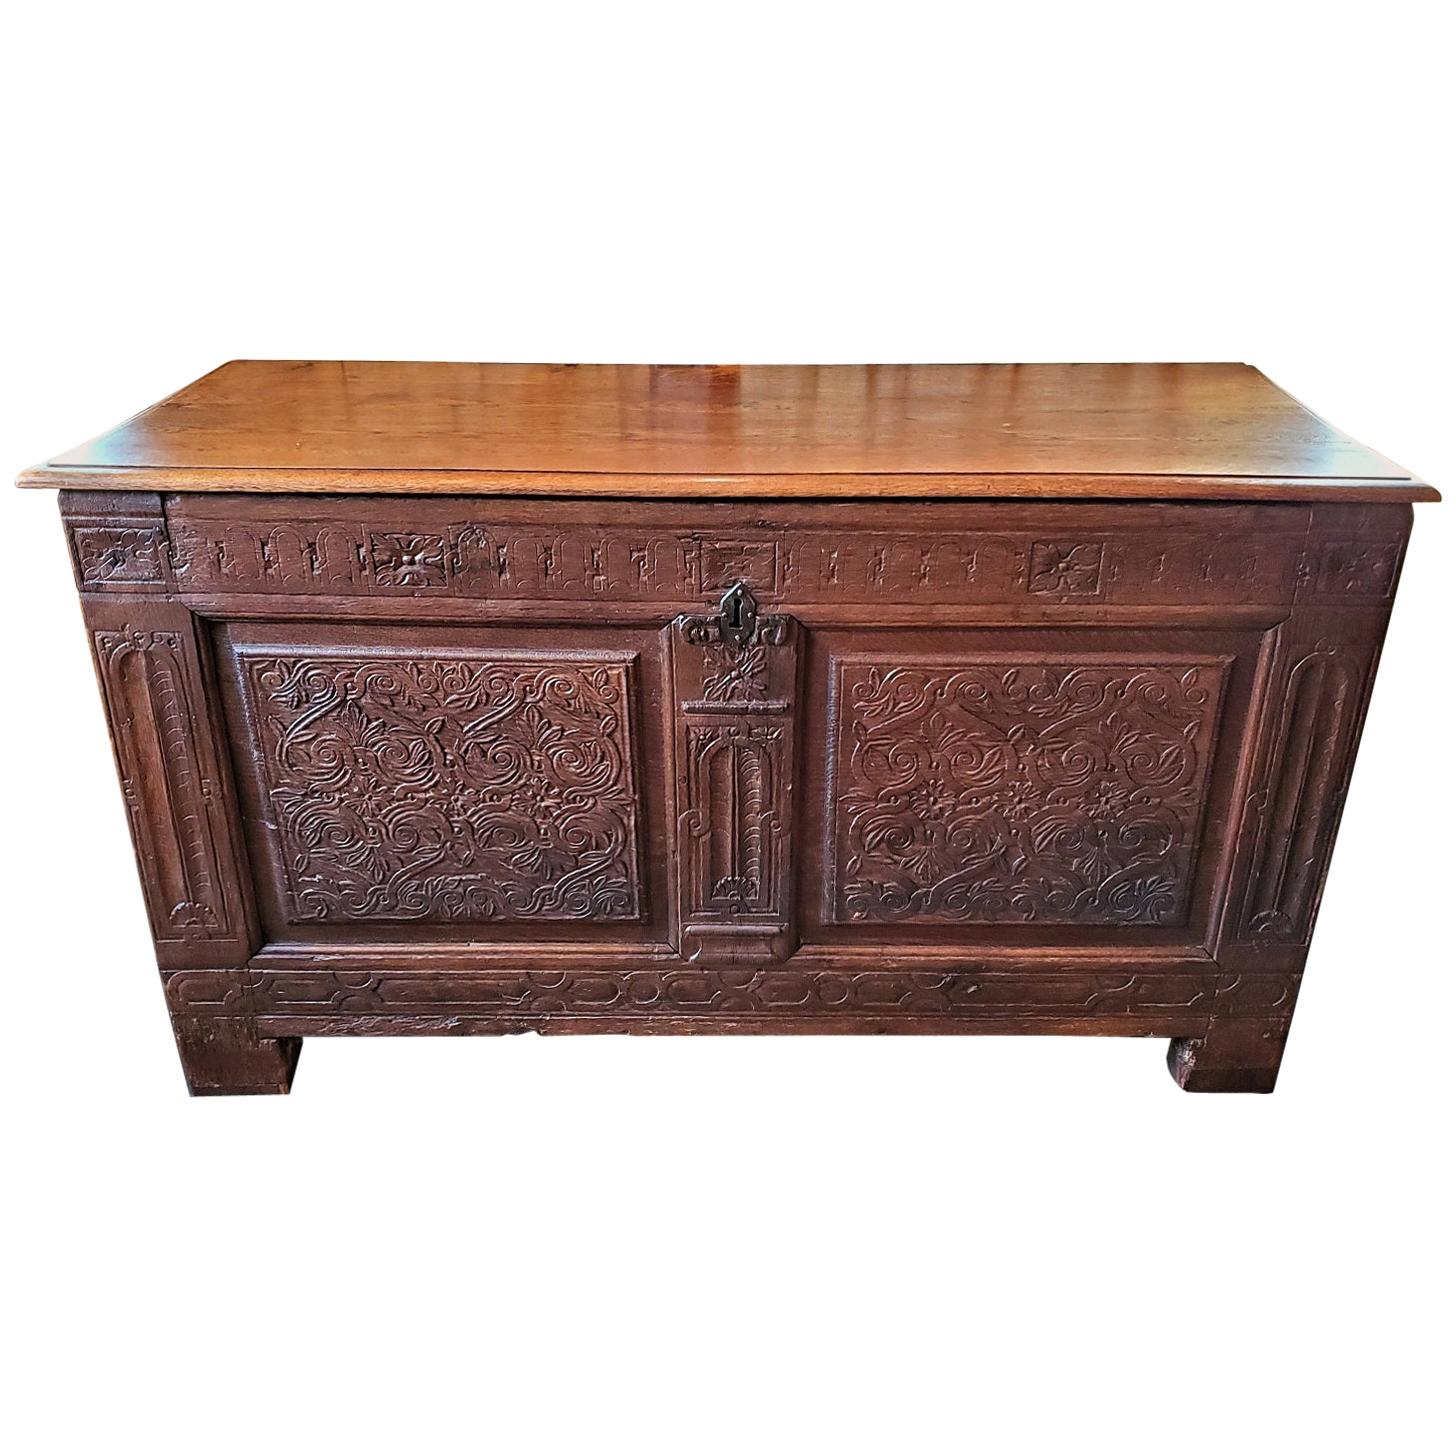 17th Century English Carved Oak Dowry Chest